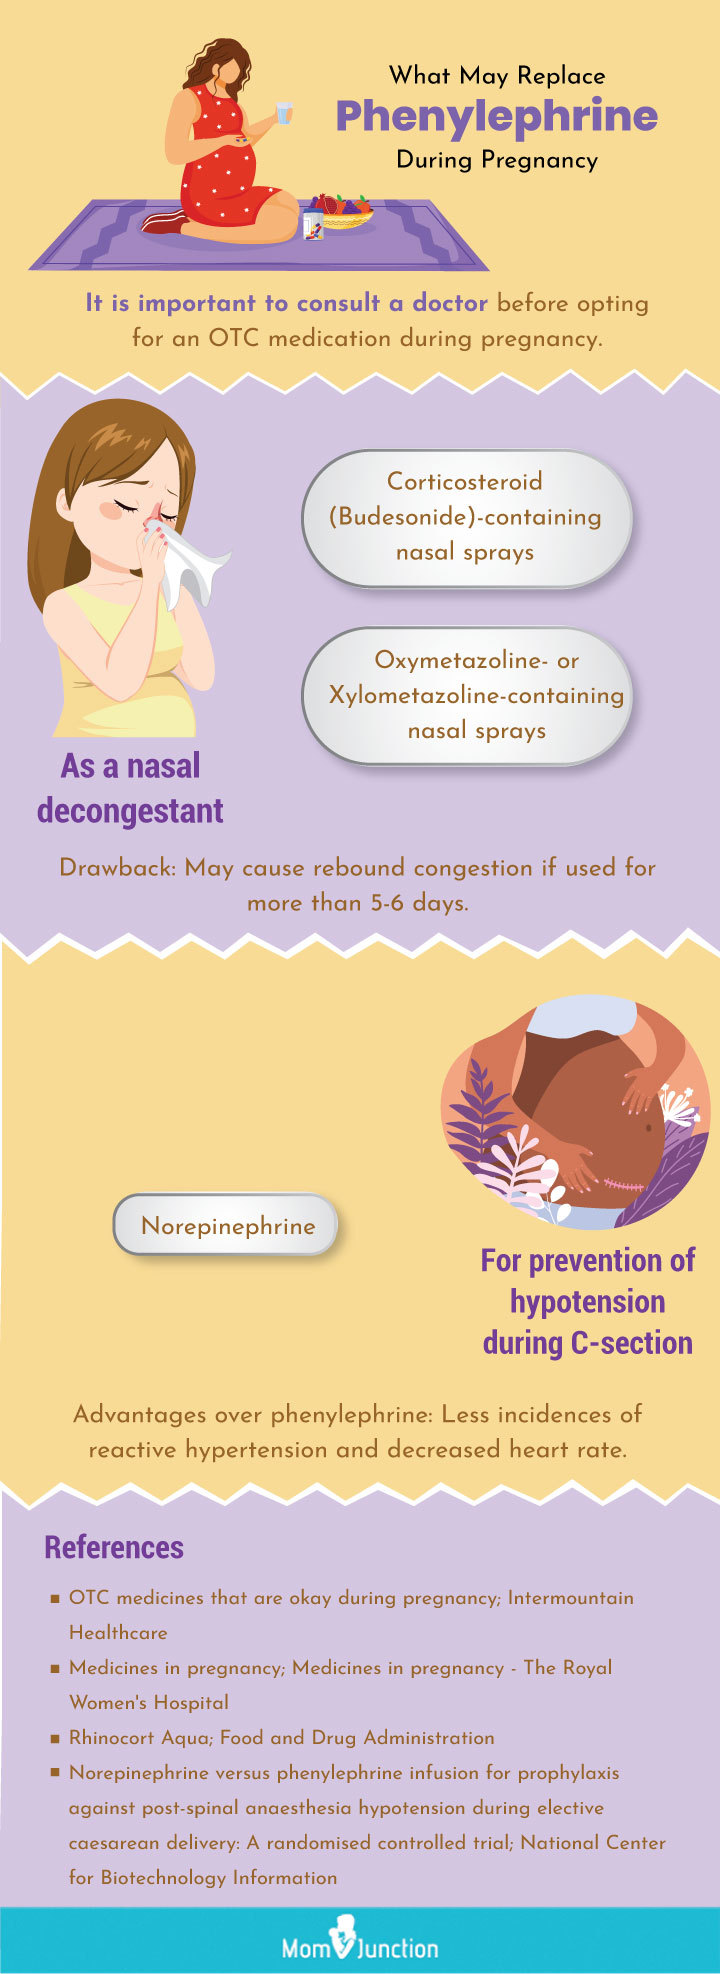 what may replace phenylephrine during pregnancy (infographic)